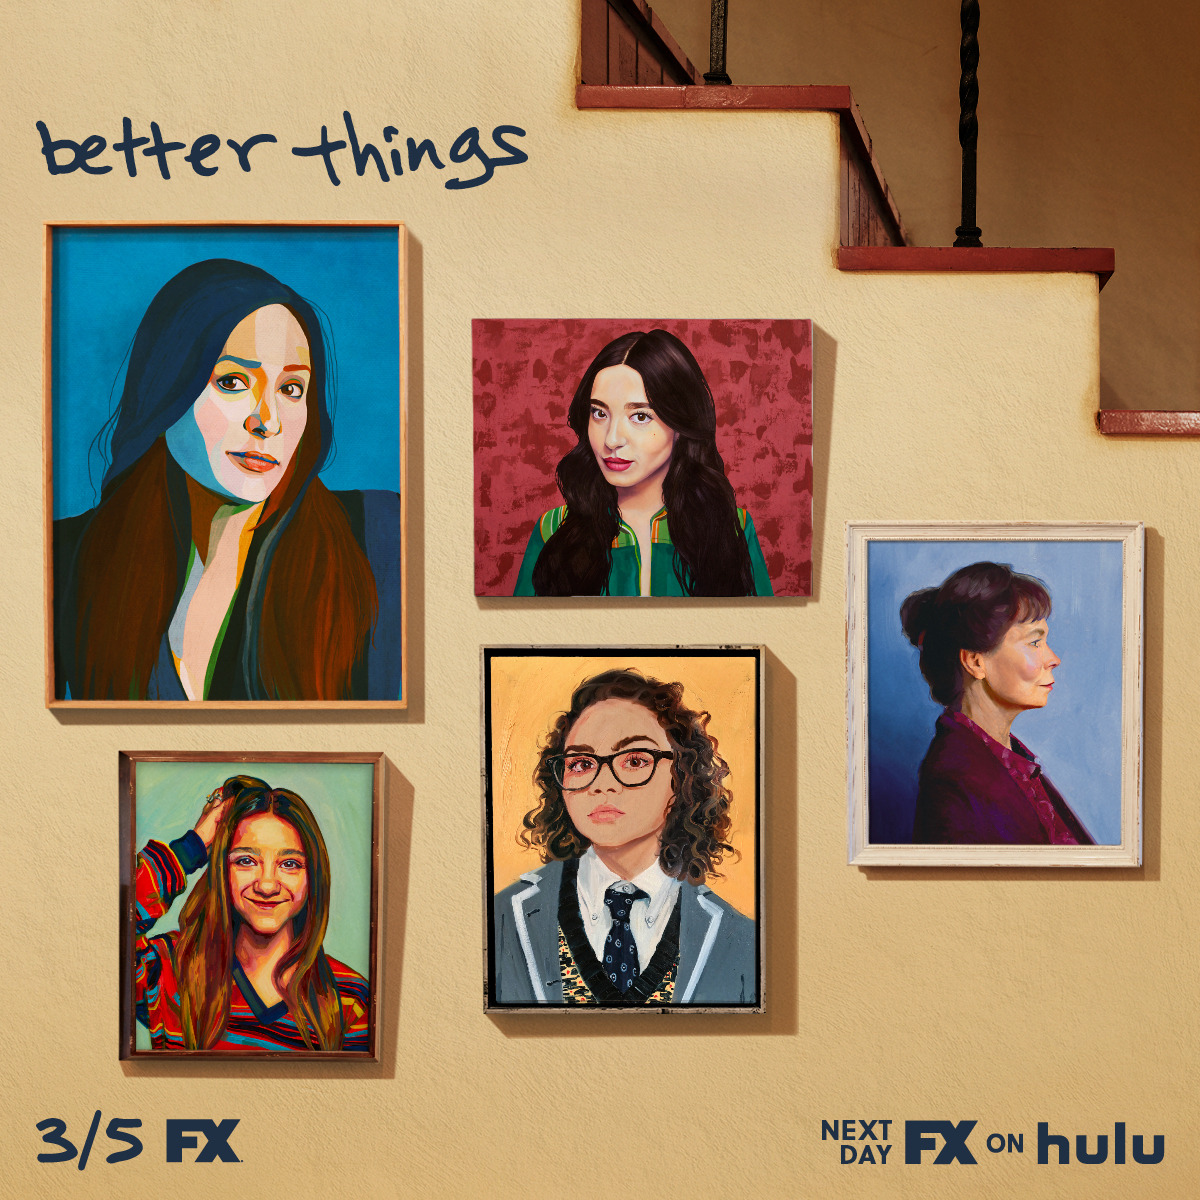 Extra Large TV Poster Image for Better Things (#9 of 11)